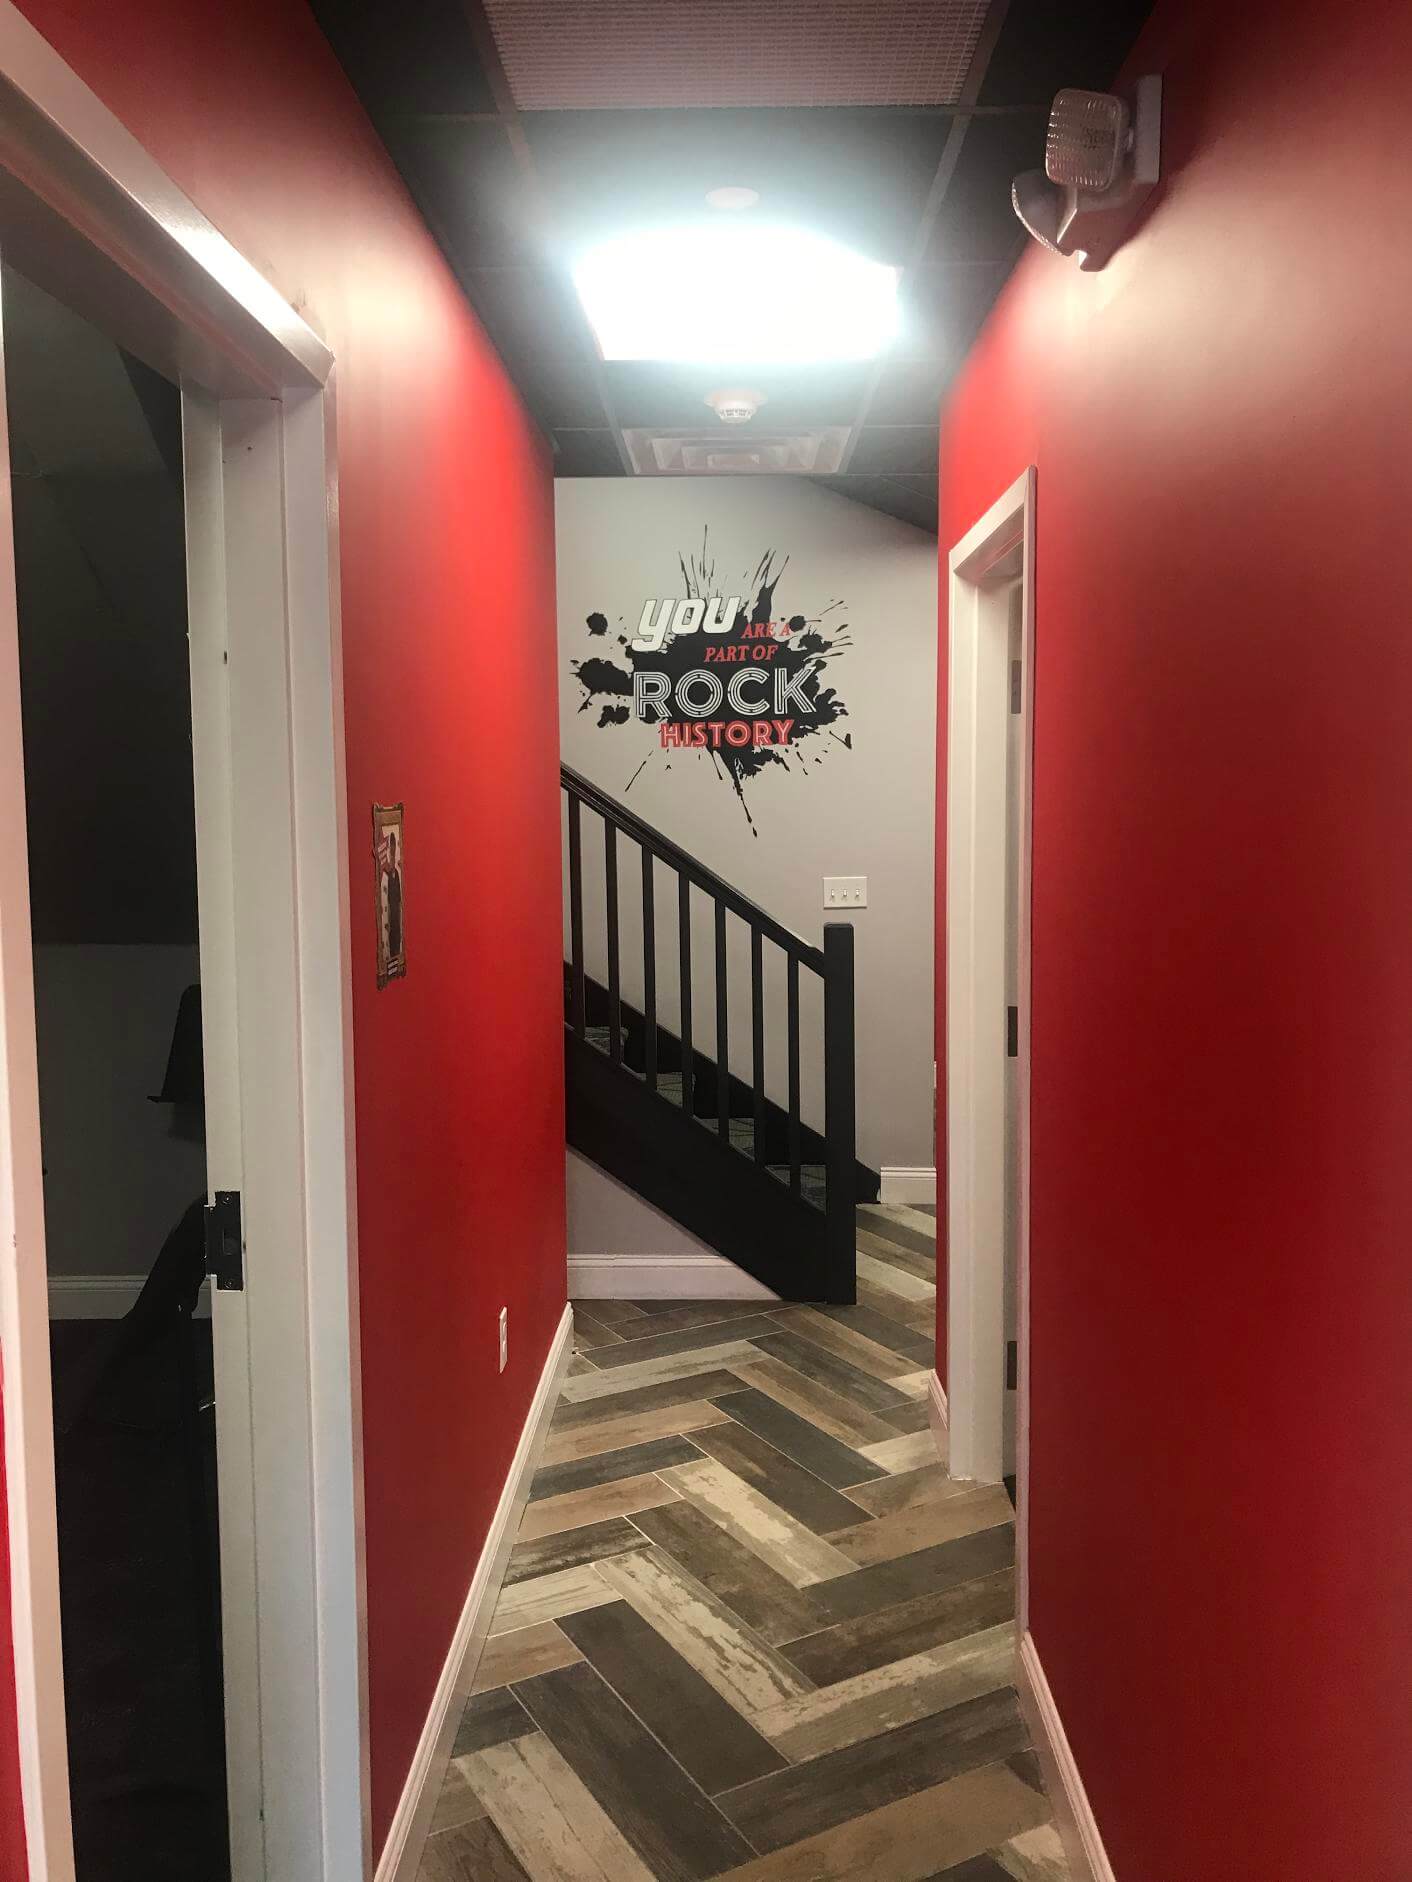 You know you're becoming a part of rock history when you enter School of Rock Hoboken.